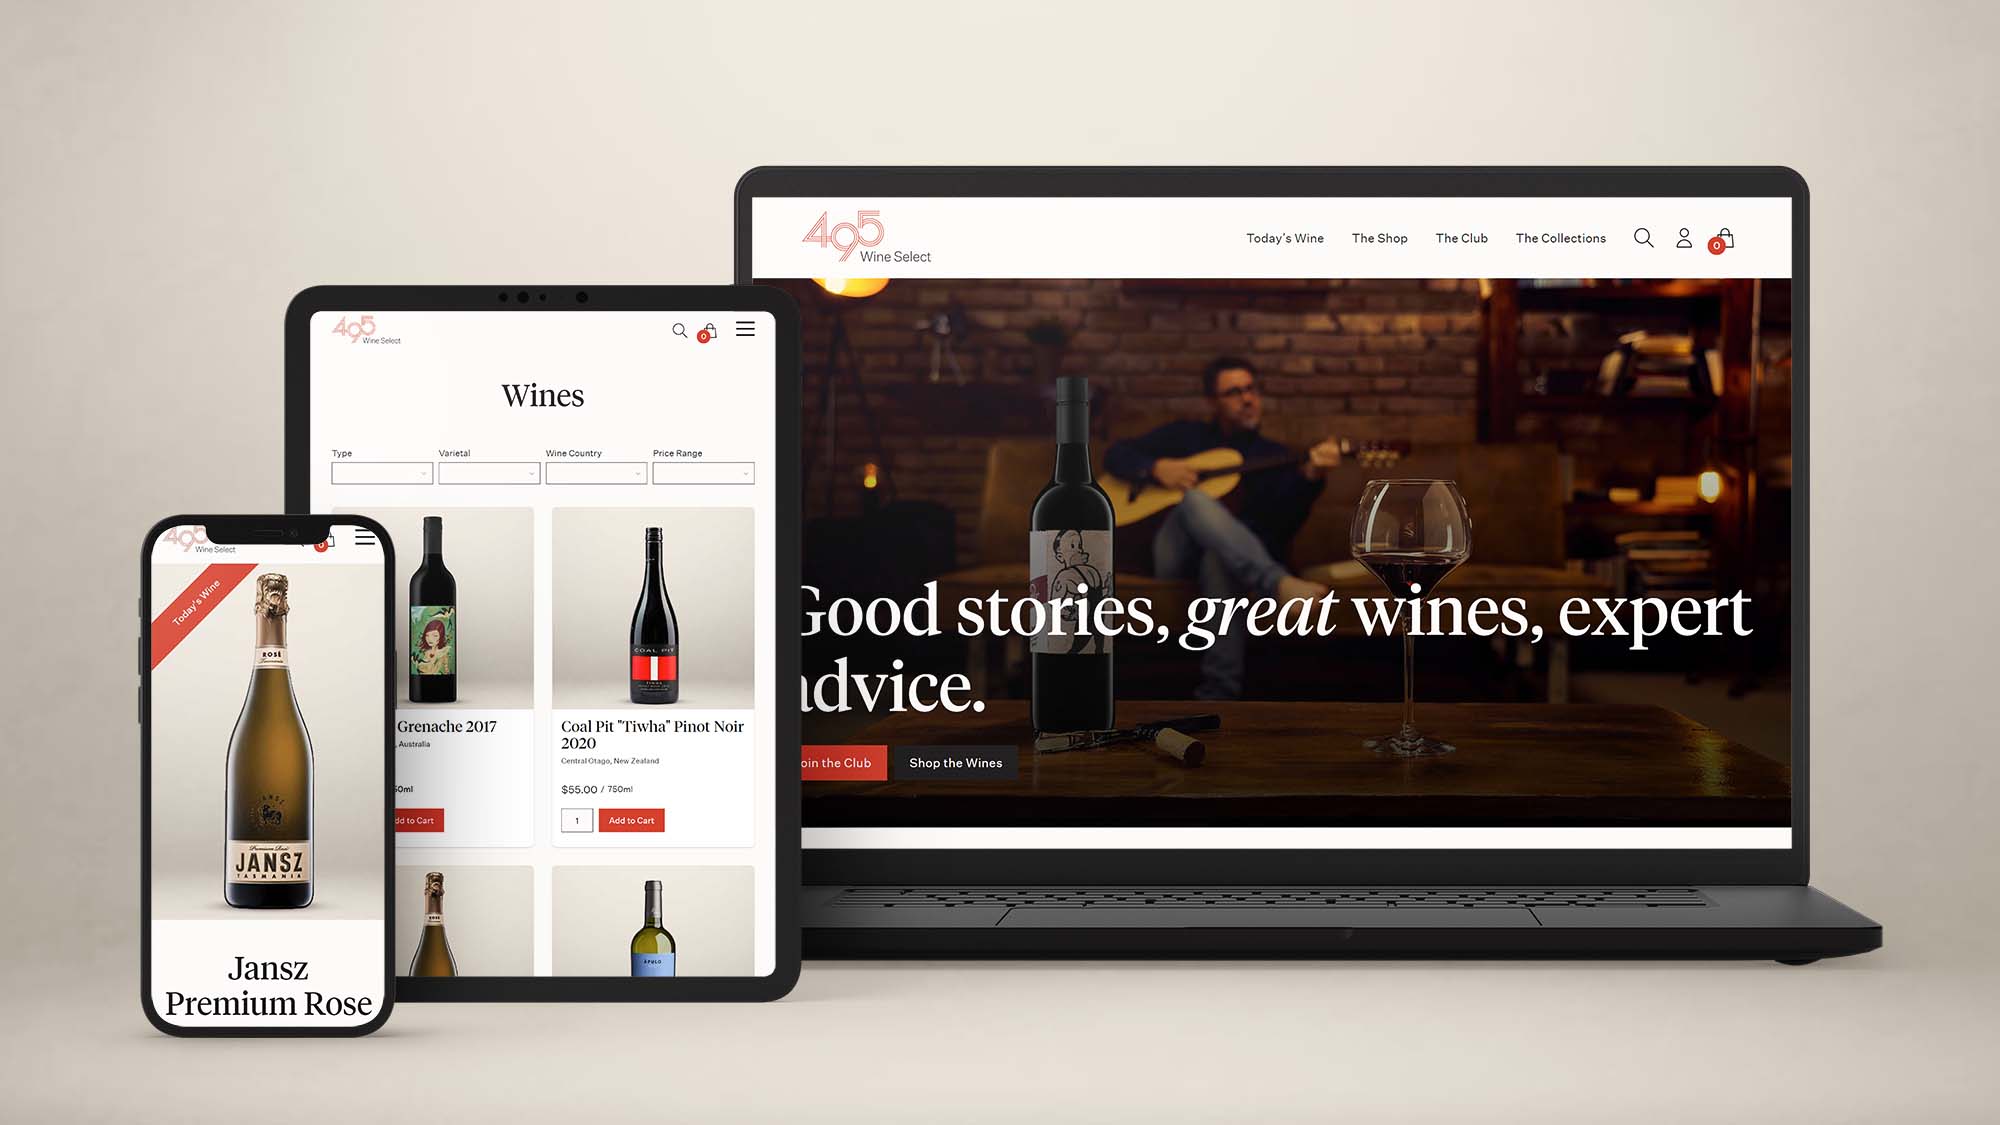 495 Wine Select website mocked up on 3 devices of different screen sizes to show responsiveness